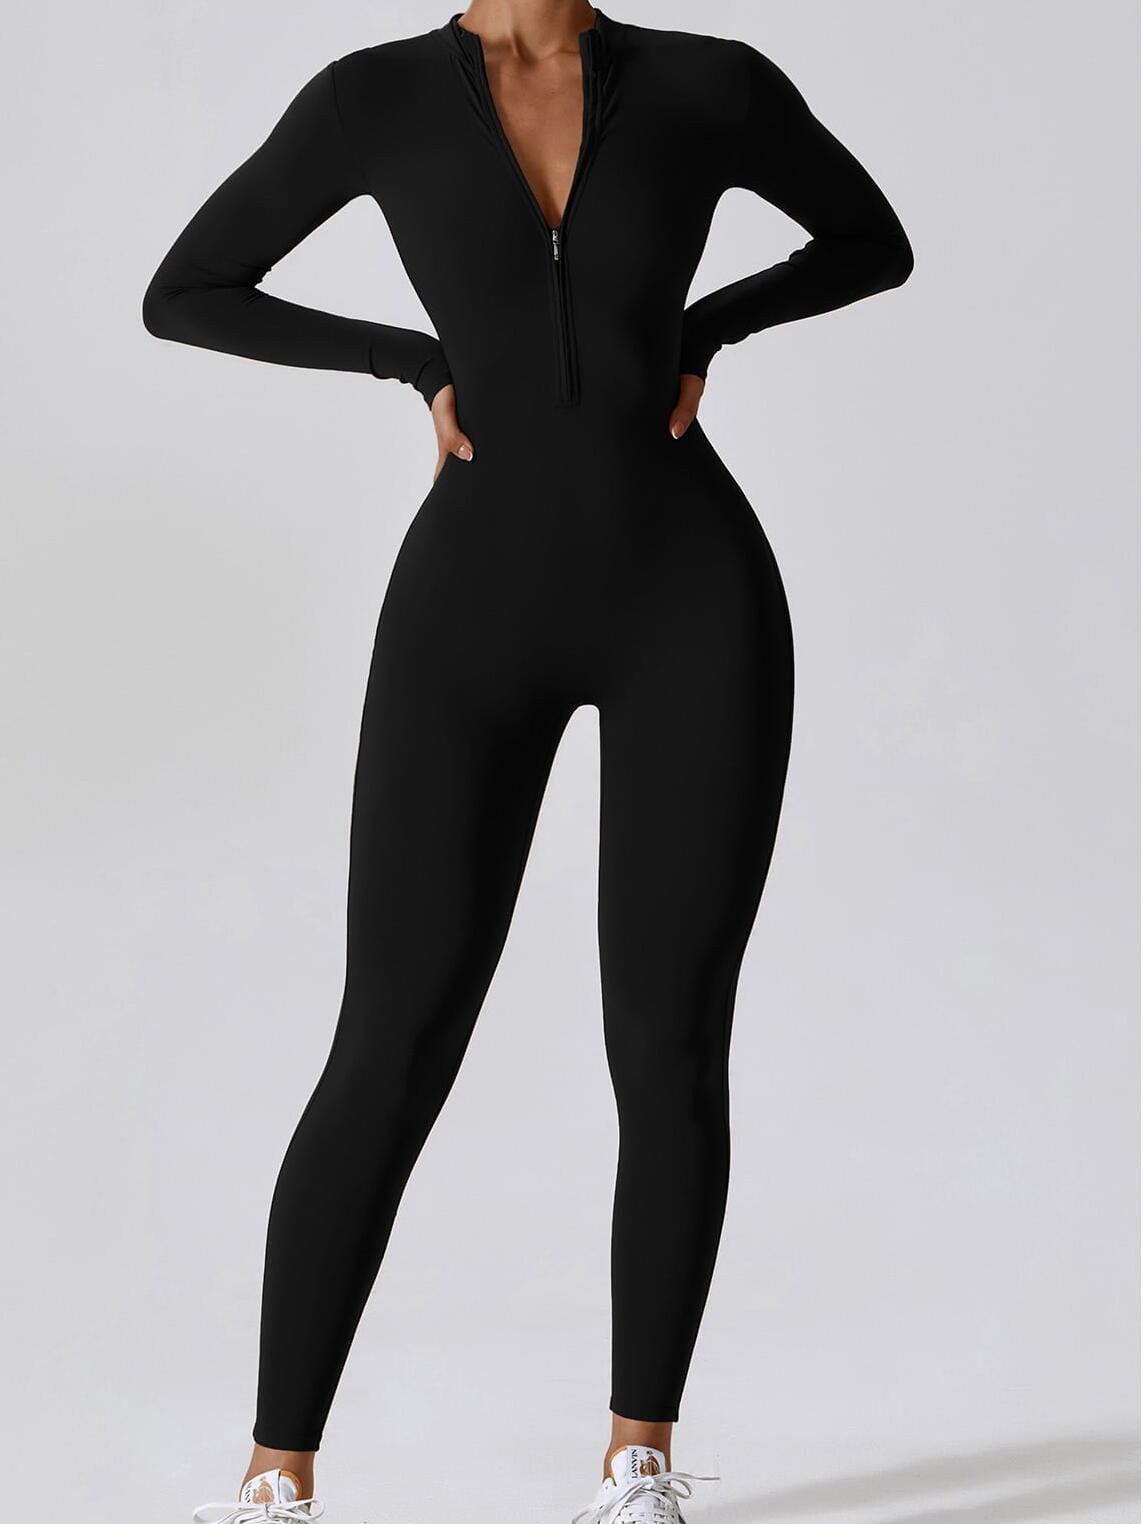 https://valueyoga.co/wp-content/uploads/2023/07/Cozy-Up-in-Style-Ankle-Length-Onesie-with-Long-Sleeves-Zipper-Closure-and-Maximum-Comfort-e1690145986428.jpg